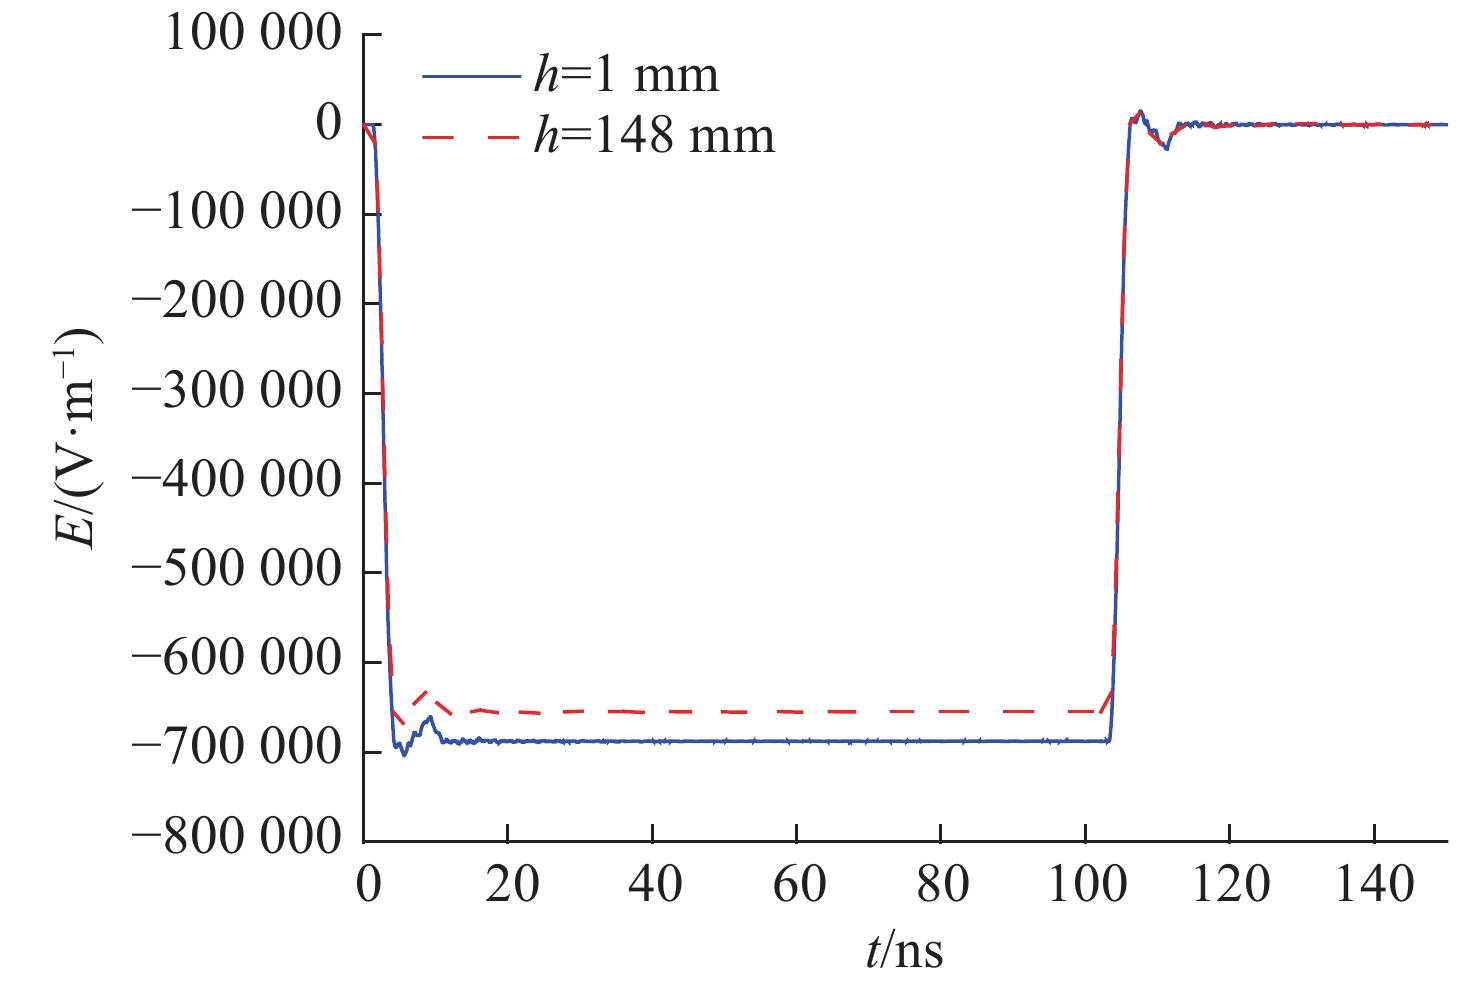 Electric field waveforms at h=1 mm and h=148 mm when d=149 mm